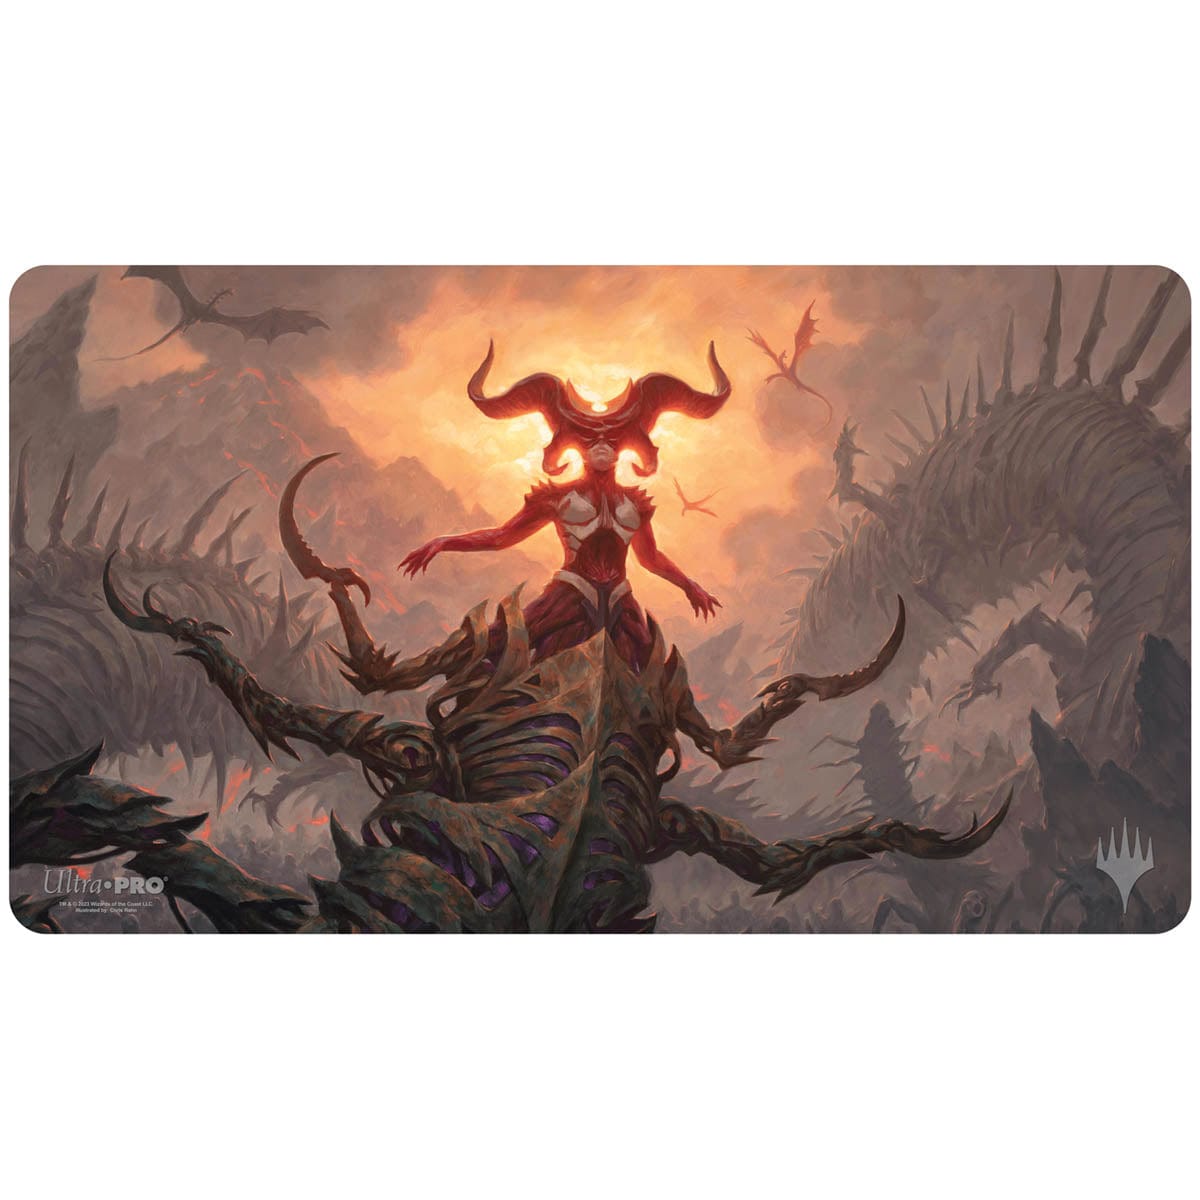 Sheoldred, the Apocalypse Playmat